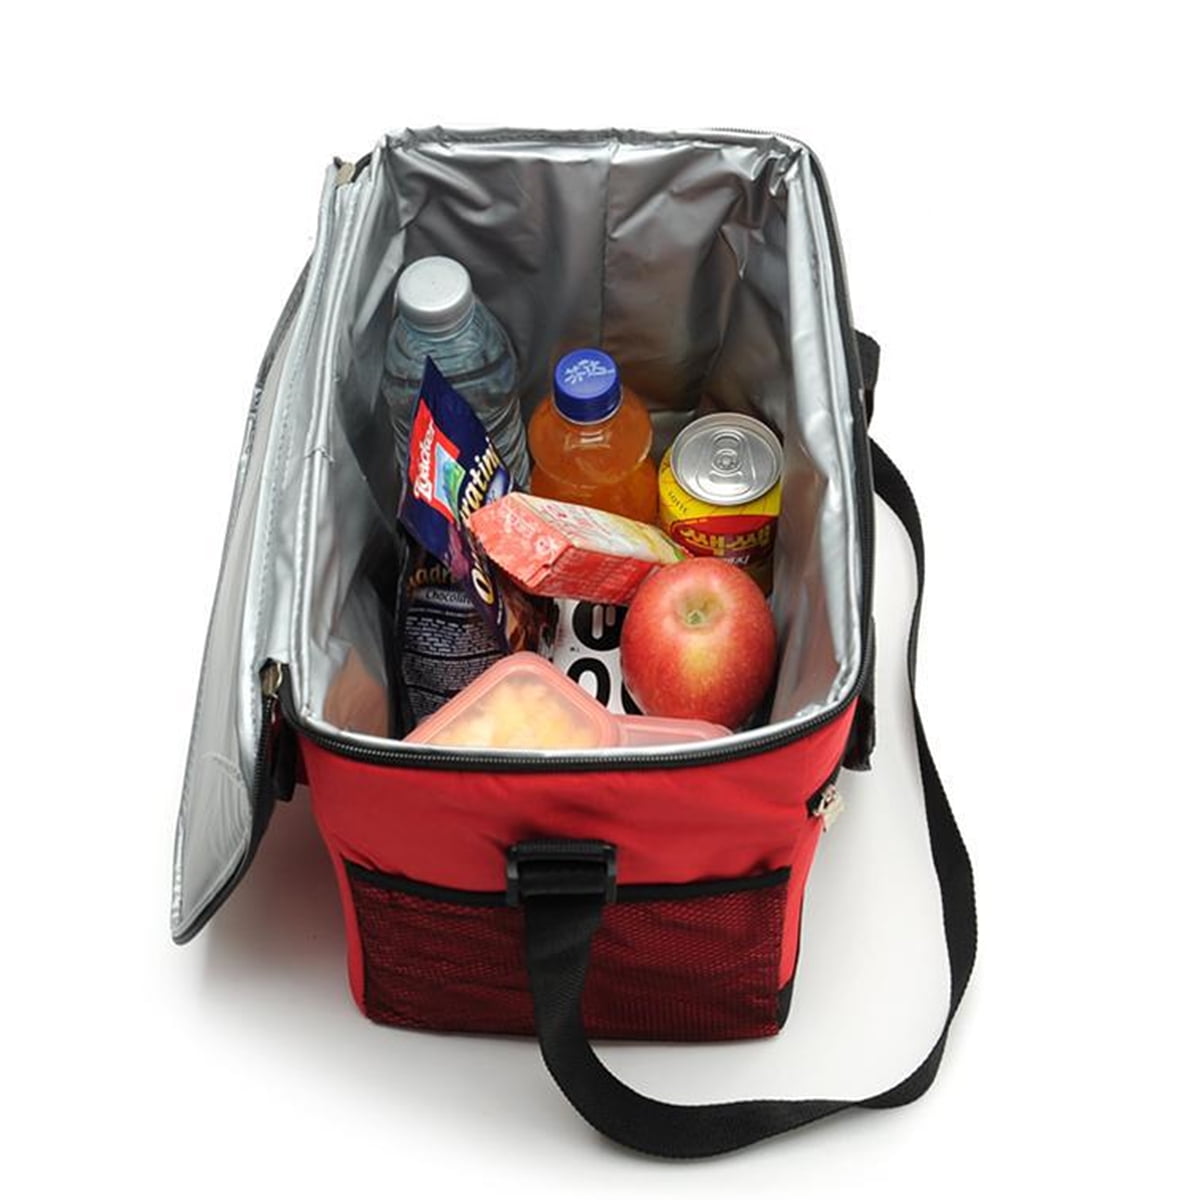 Details about   Lunch Cooler Bag Tote Easy Carry Picnic Basket Food Storage Thermal Insulated US 